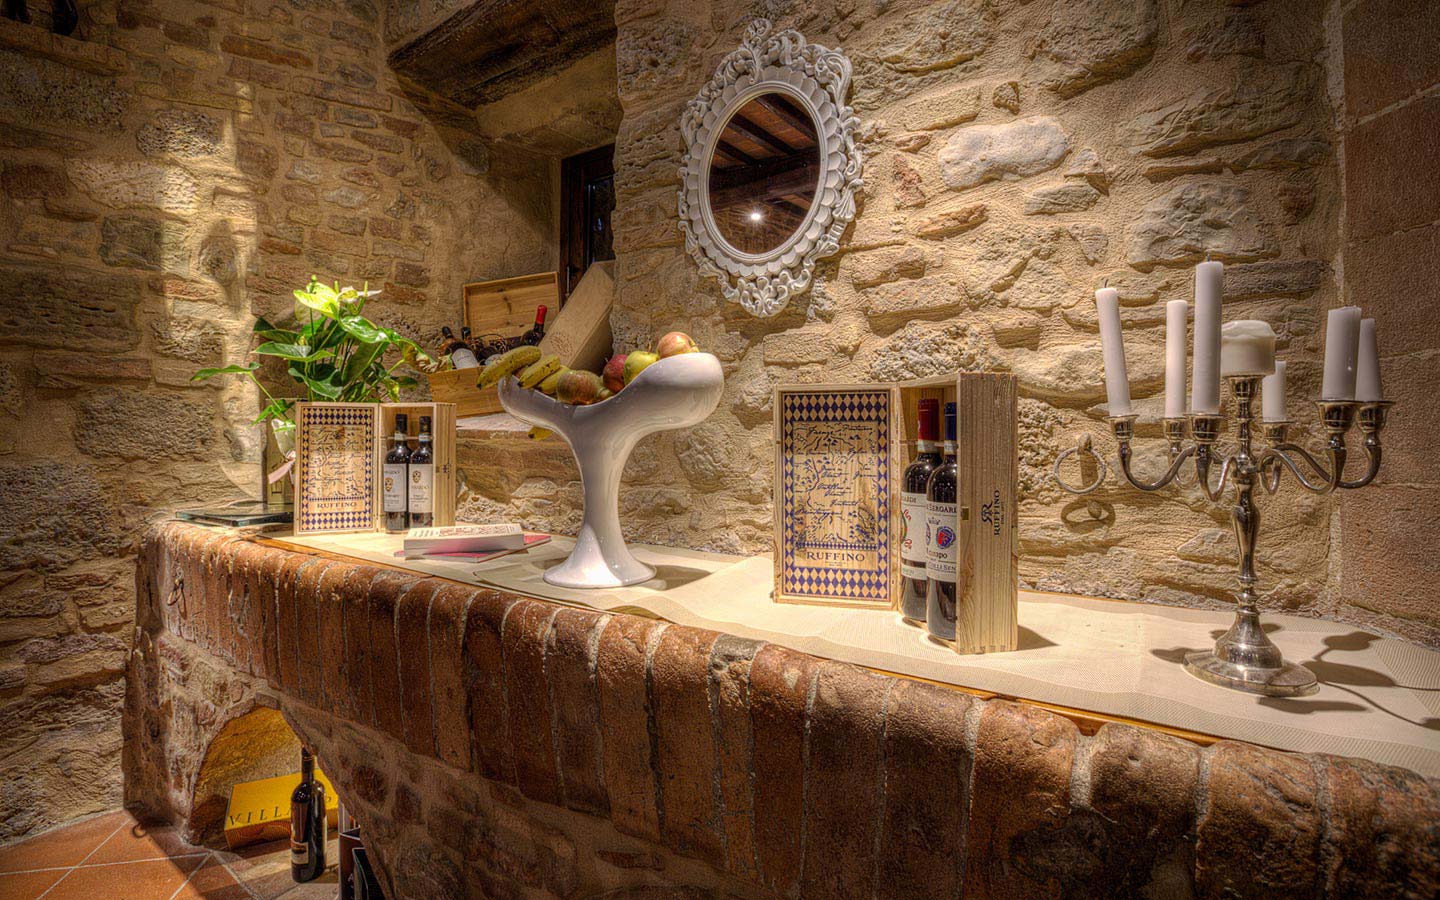 Hotel spa restaurant in Tuscany Casole d'Elsa province of Siena